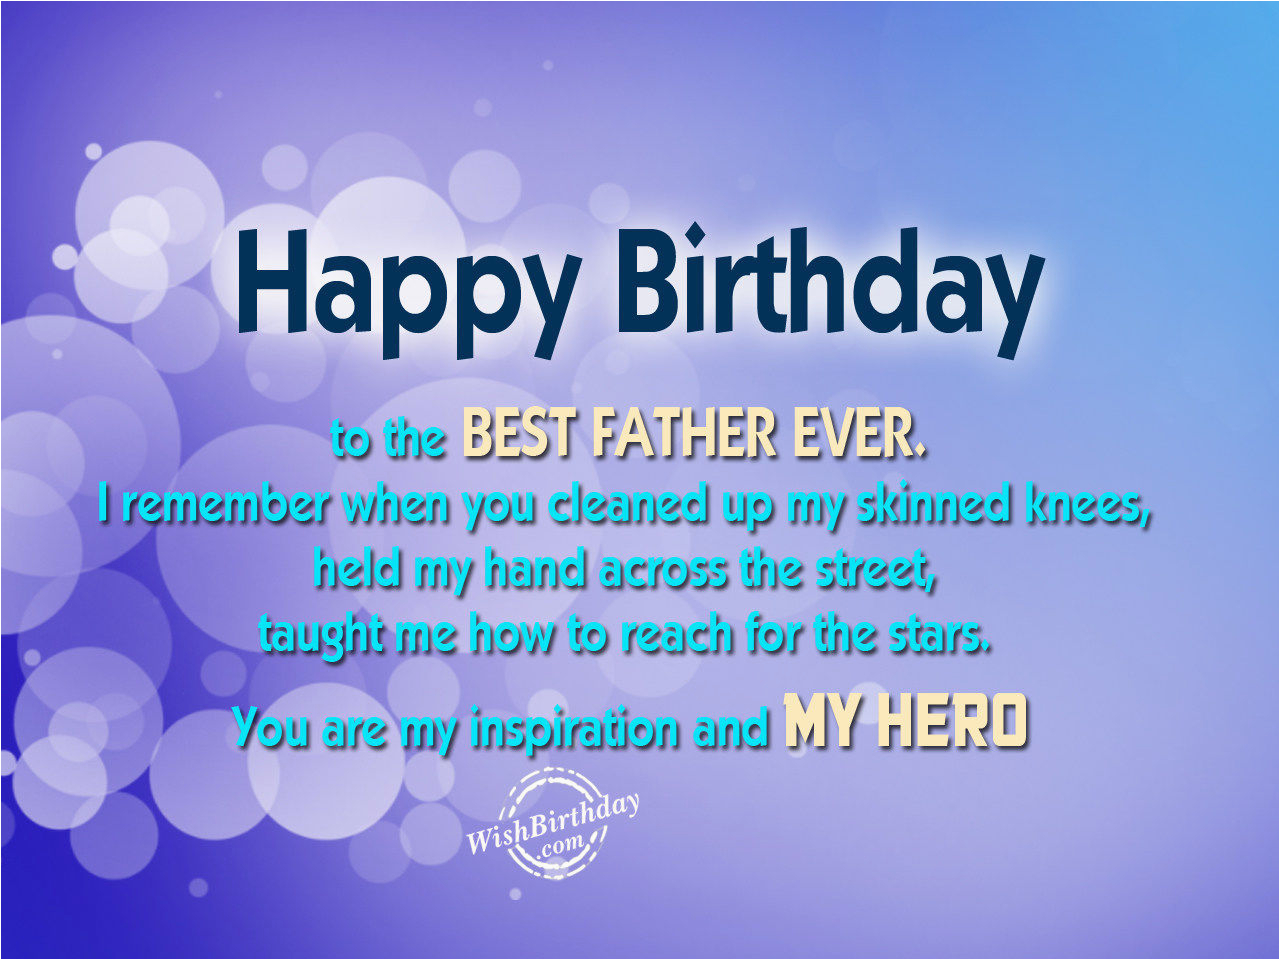 happy birthday to the best father ever